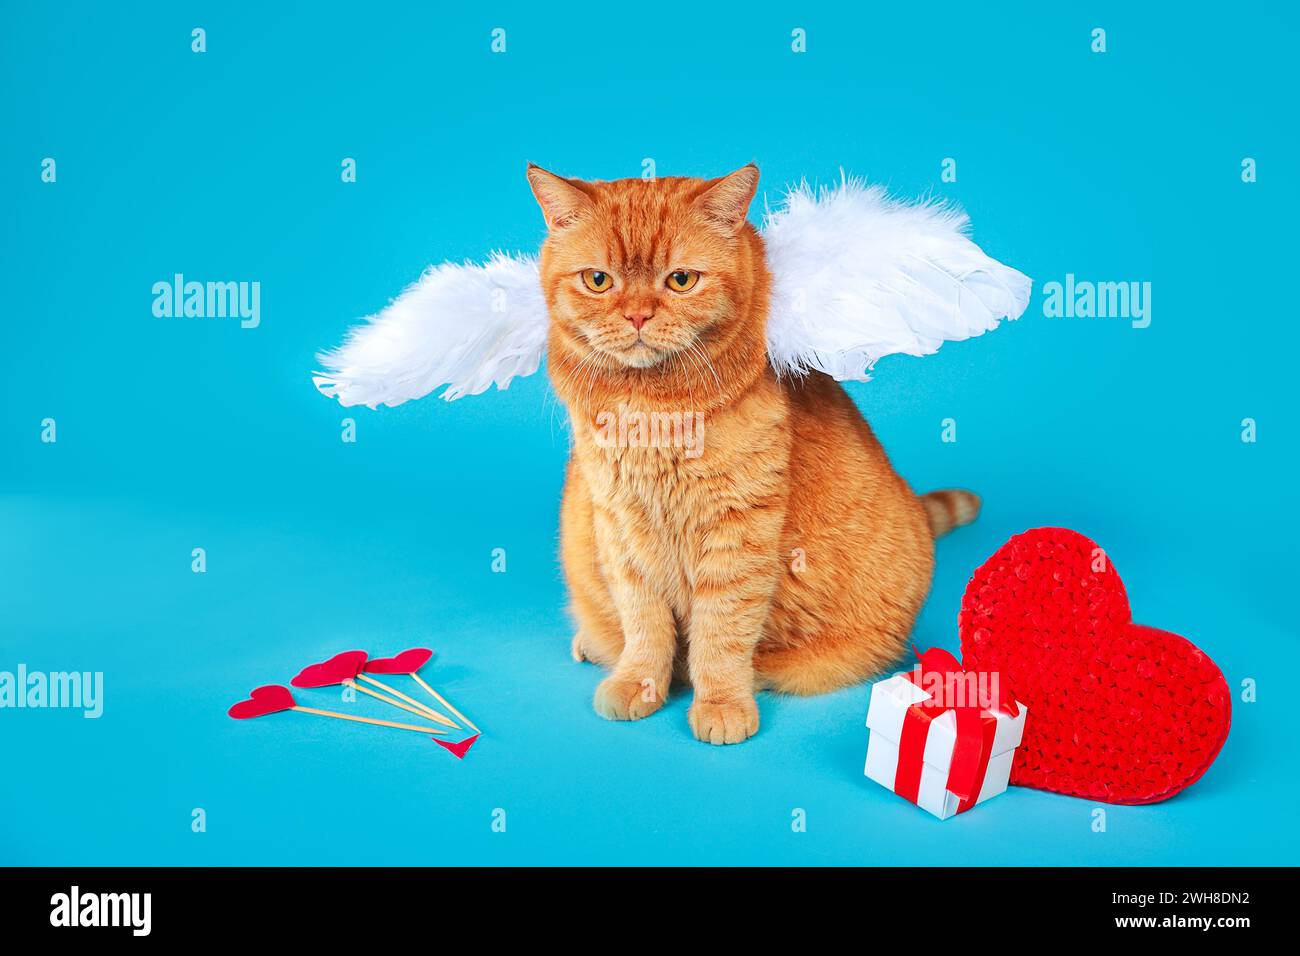 Valentines Day Cupid. Portrait of red british cat with angel white wings on blue background. Stock Photo